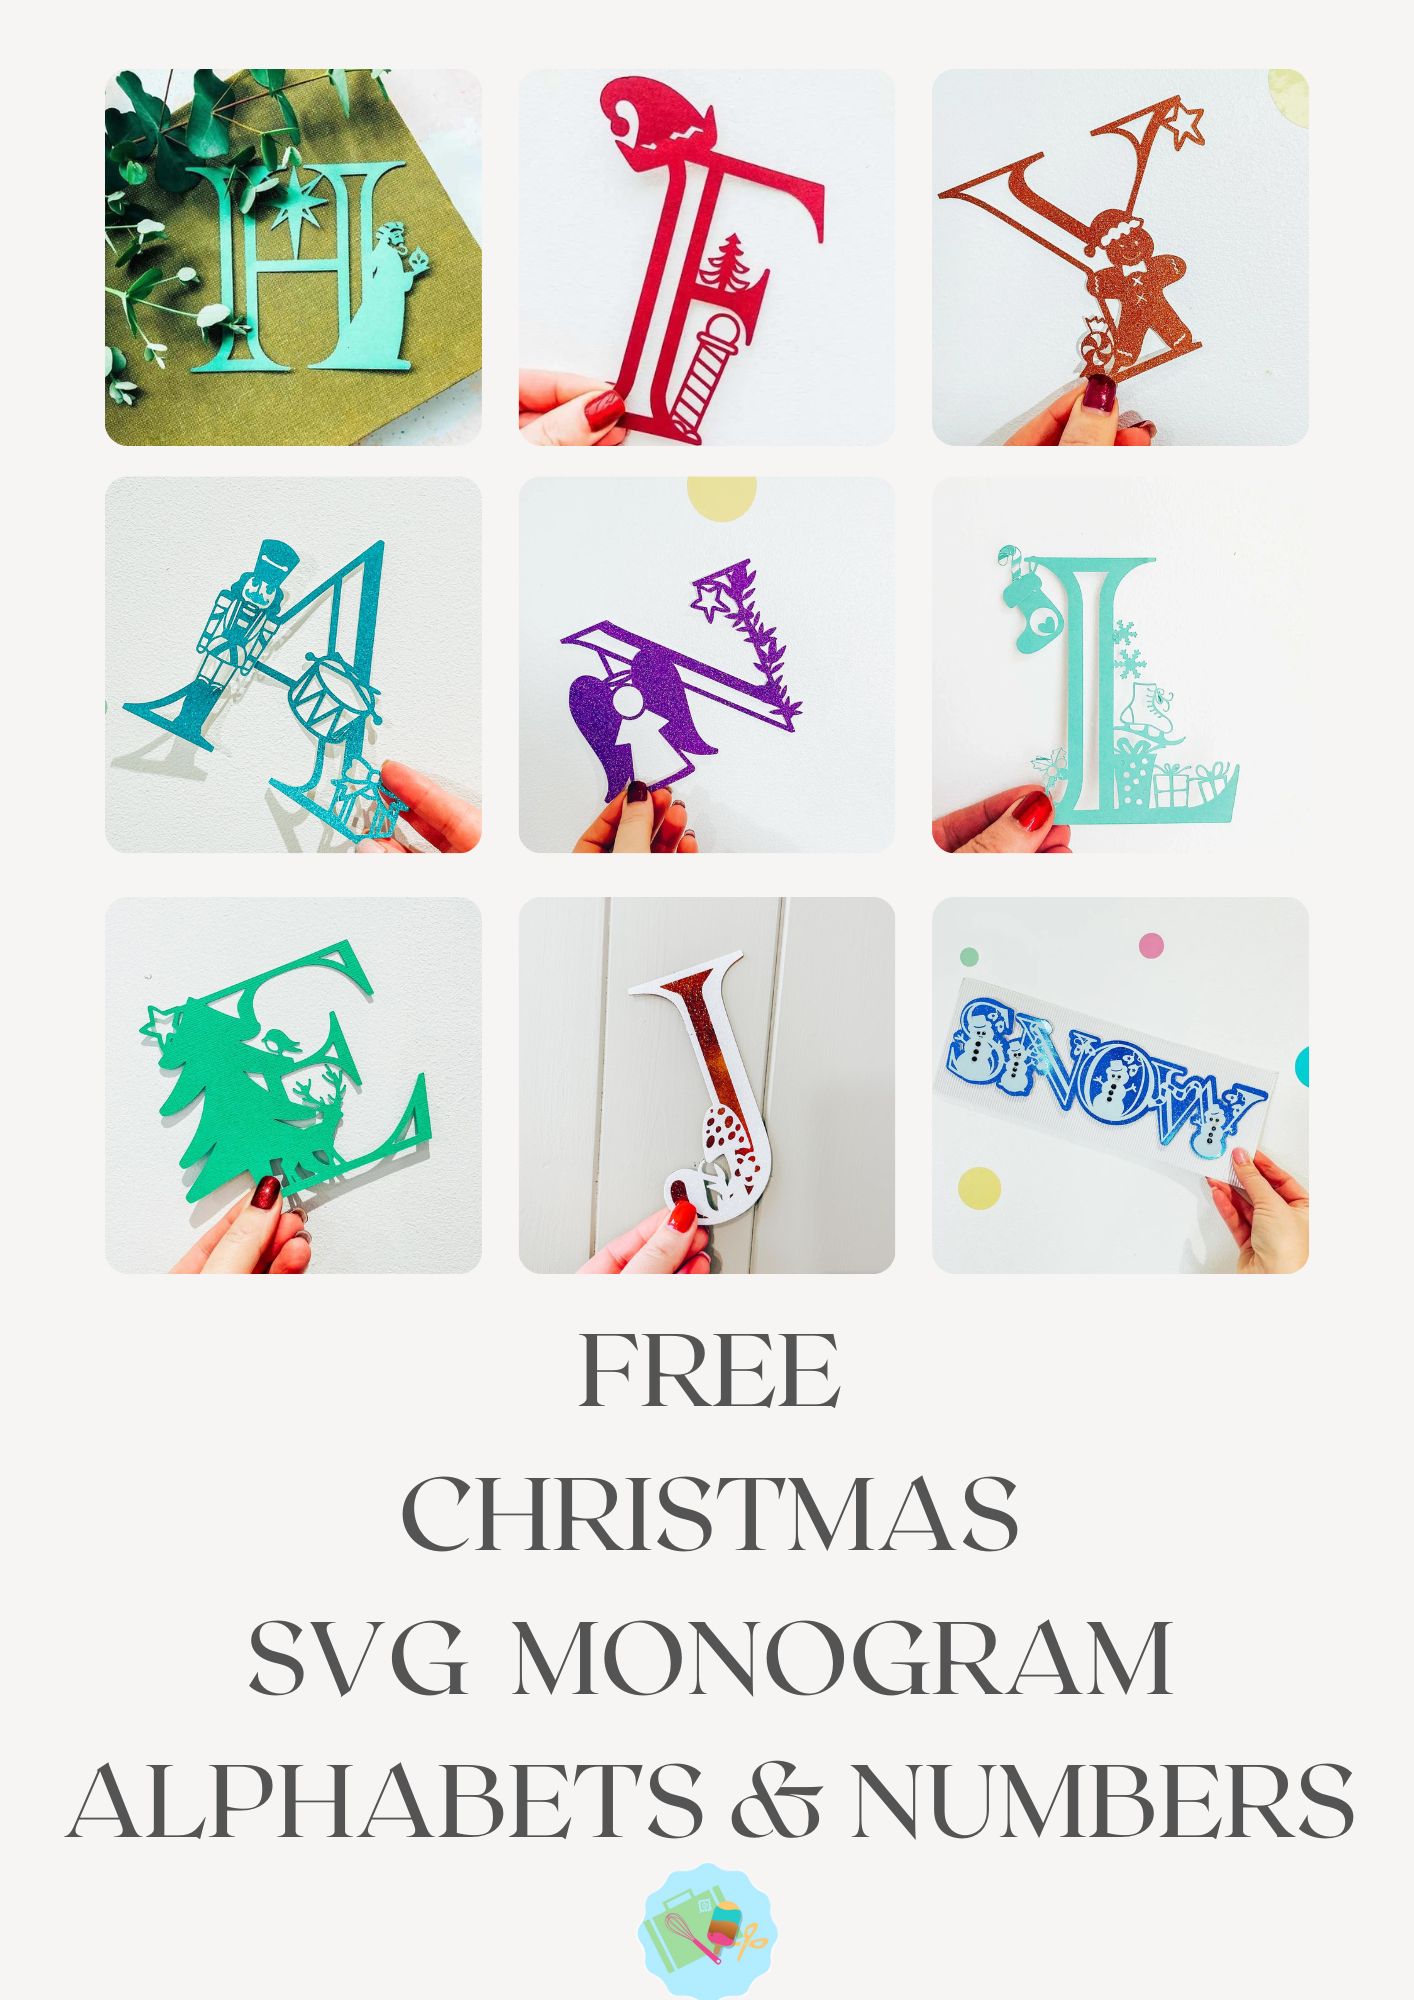 FREE CHRISTMAS SVG MONOGRAM LETTERS AND NUMBERS FOR CRICUT, SILHOUETTE AND GLOWFORGE